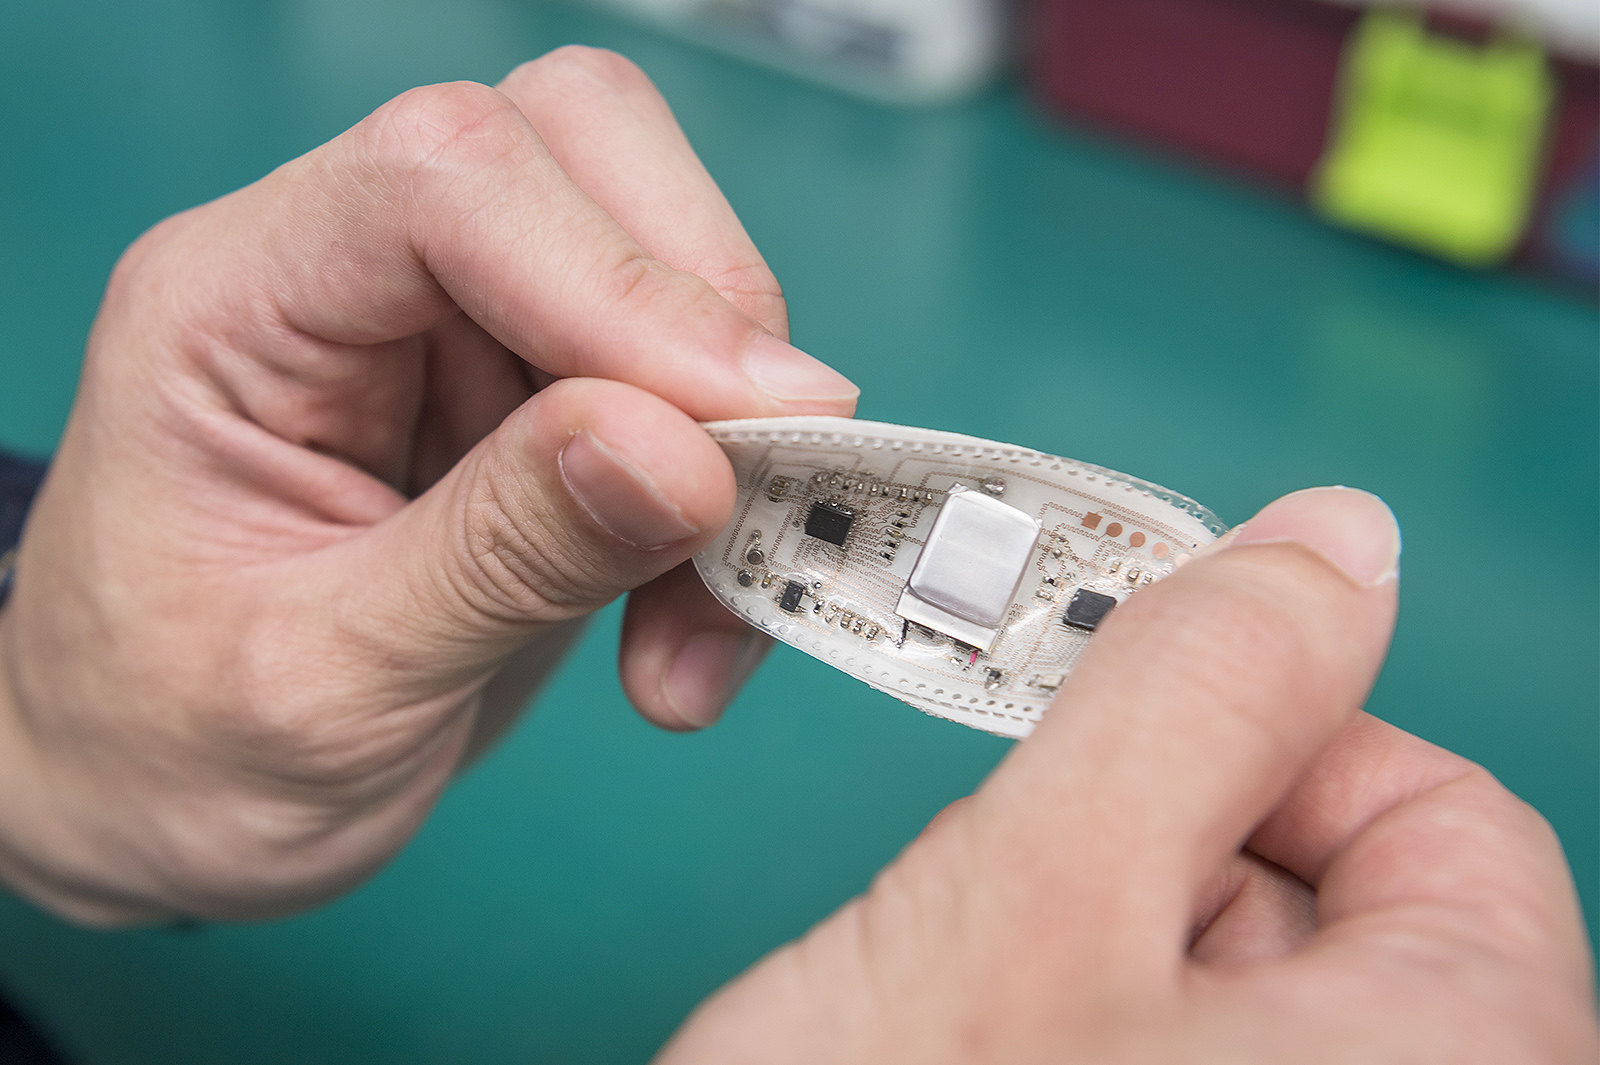 The permeable wearable electronics developed by the team for long-term biosignal monitoring.